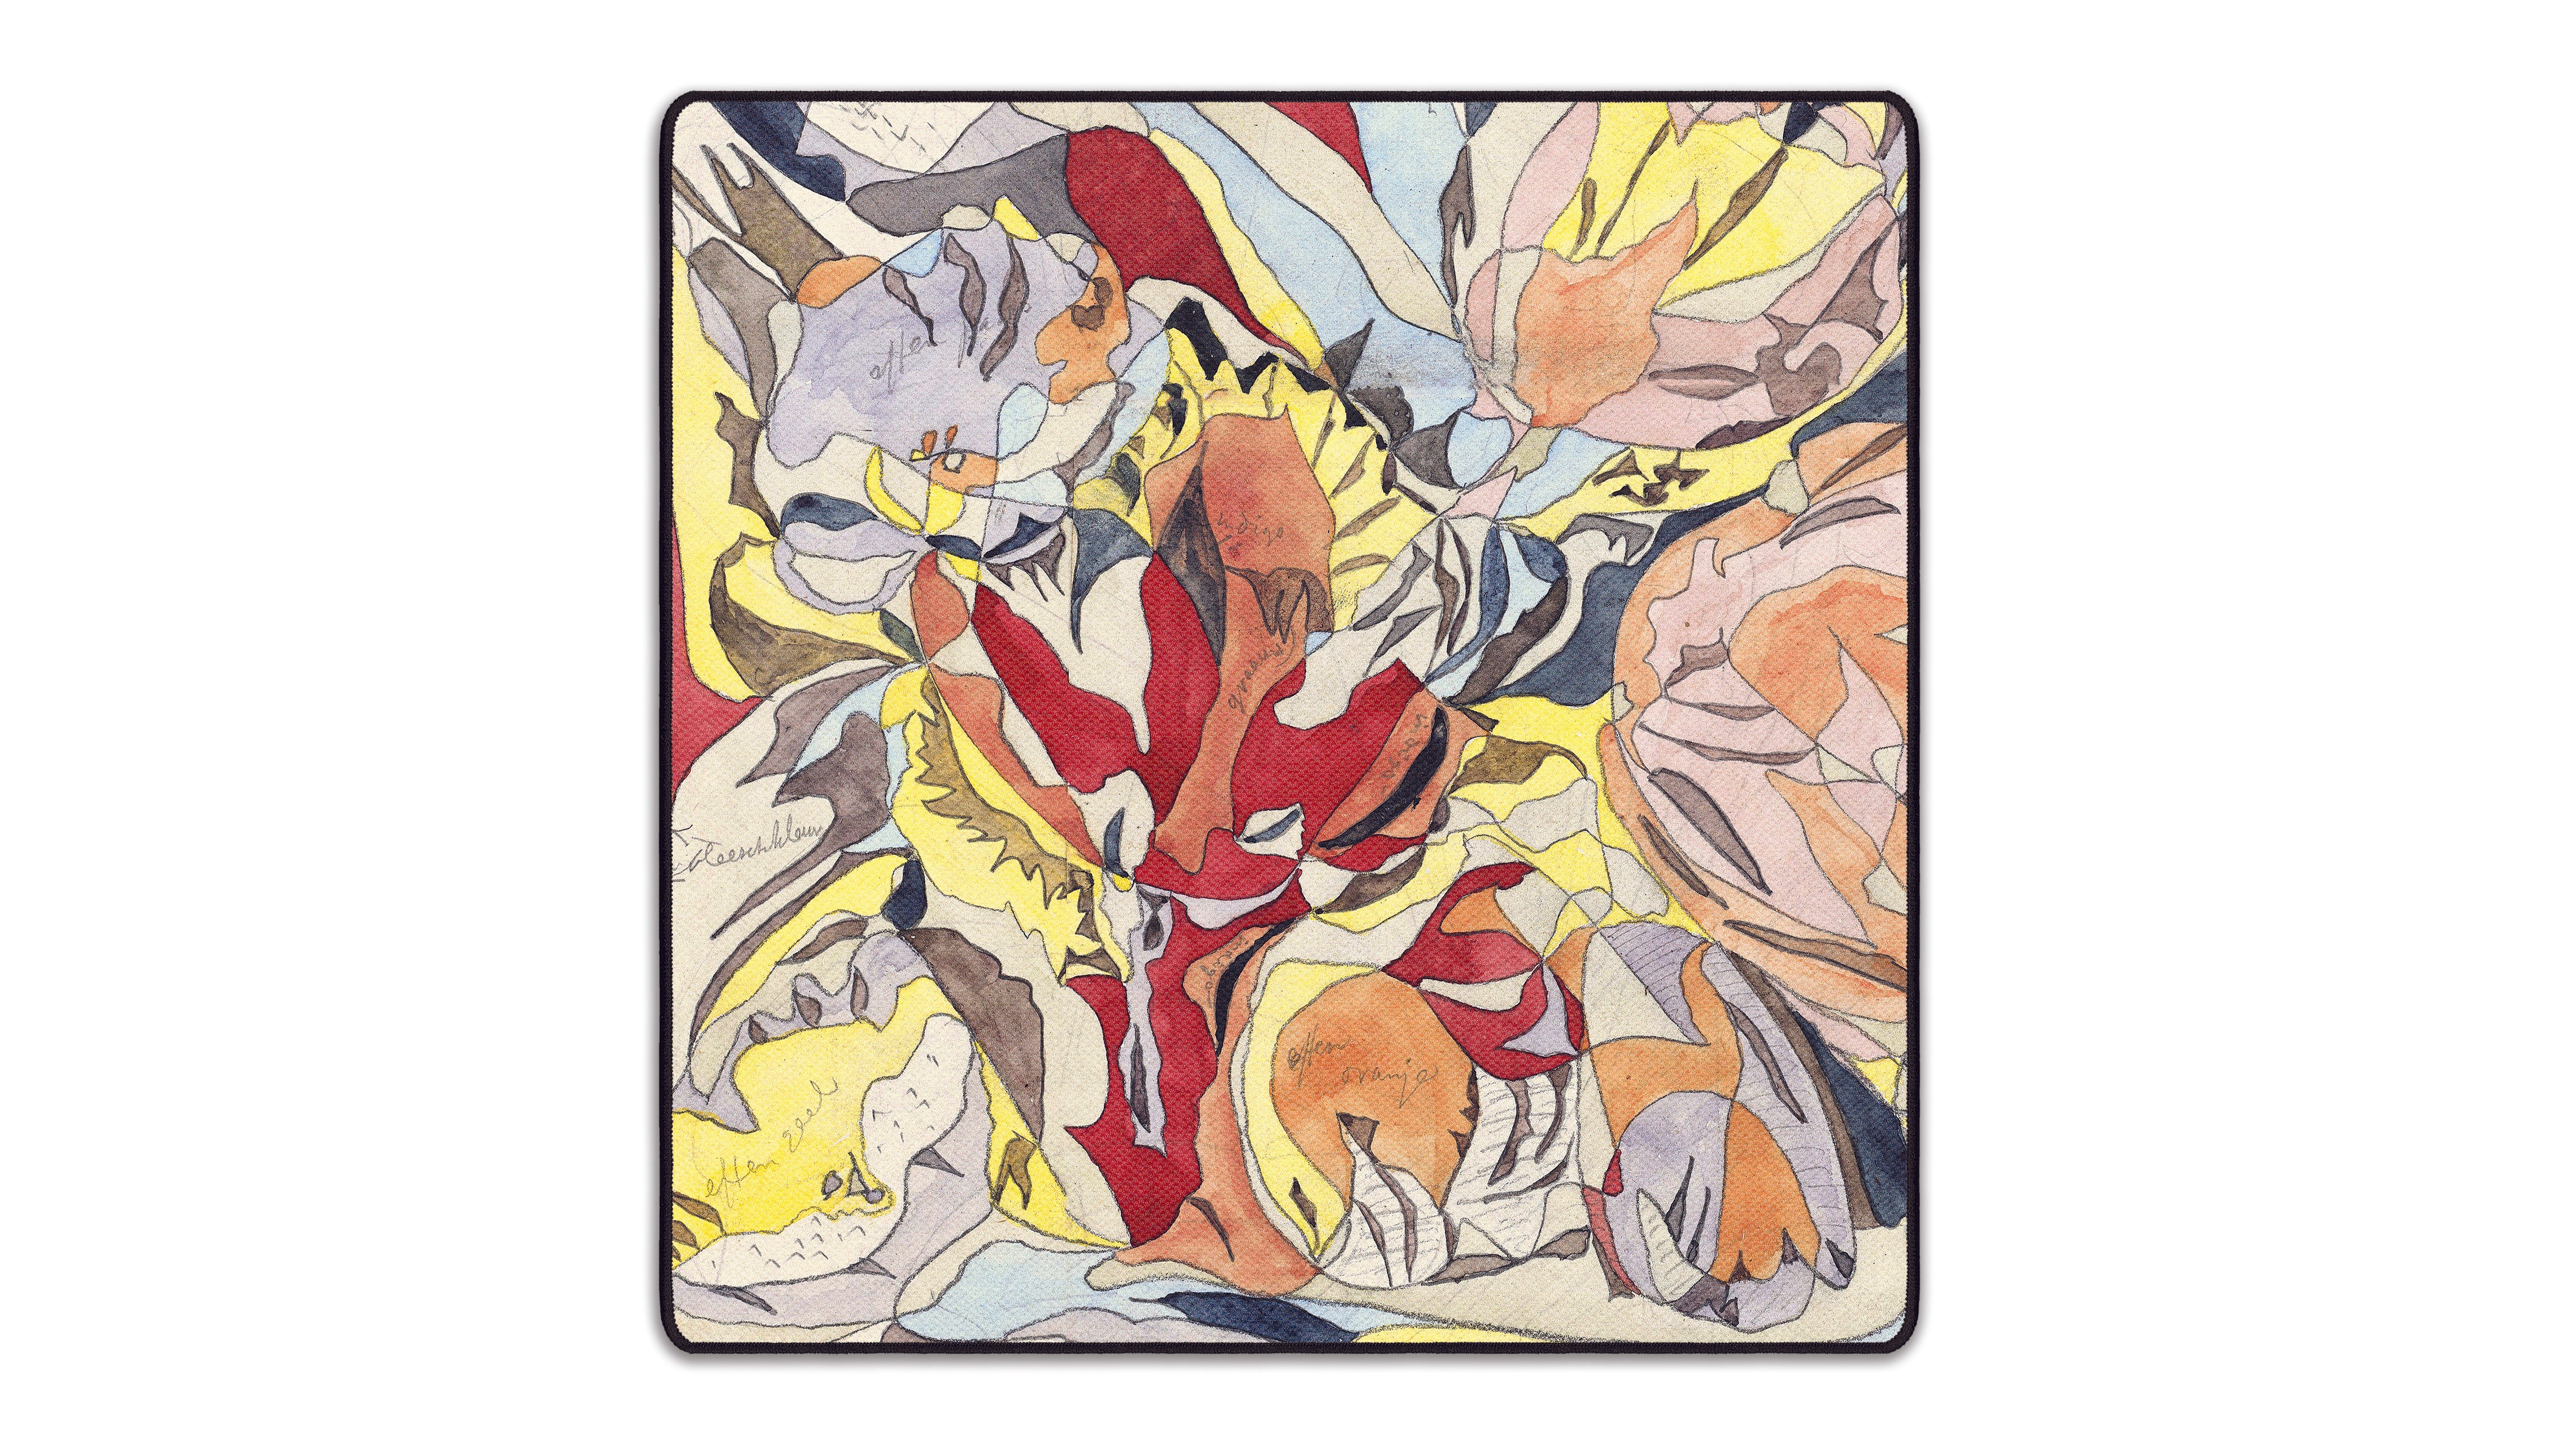 Flower Market, by Theodoor Colenbrander - The Mousepad Company